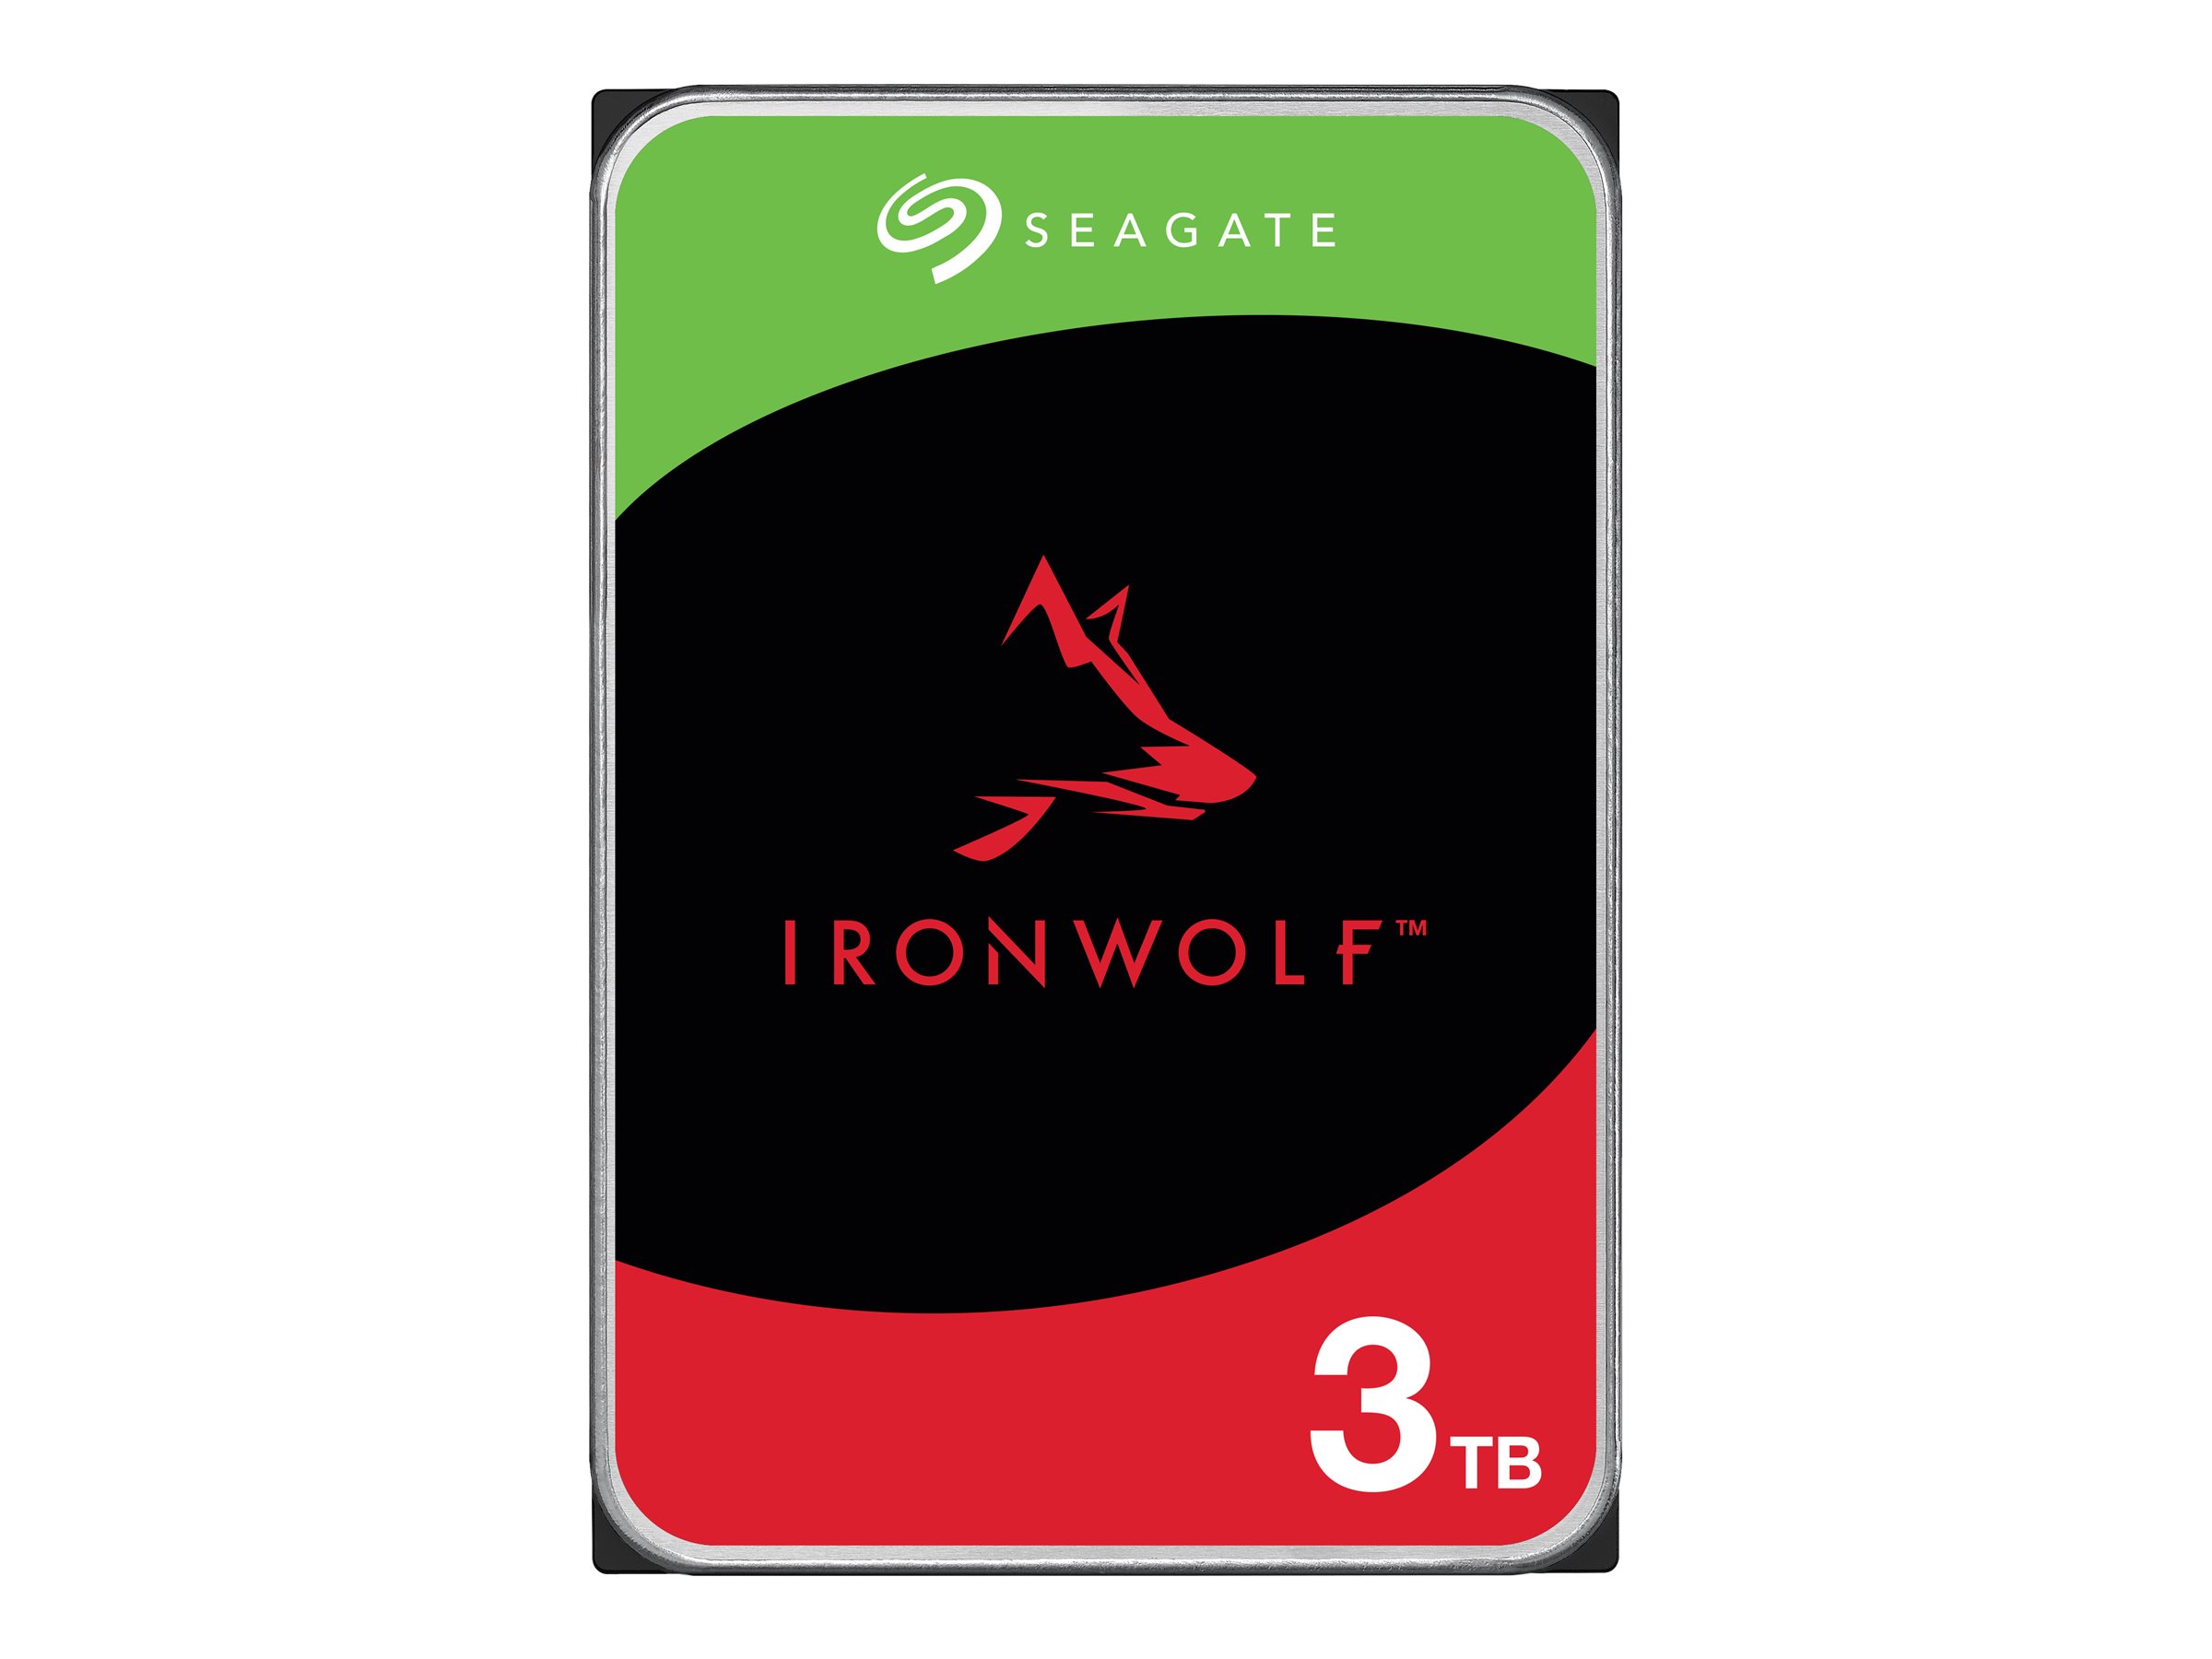 Seagate IronWolf ST3000VN006 - Disque dur - 3 To - interne - SATA 6Gb/s - 5400 tours/min - mémoire tampon : 256 Mo - avec 3 ans de Seagate Rescue Data Recovery - ST3000VN006 - Disques durs internes